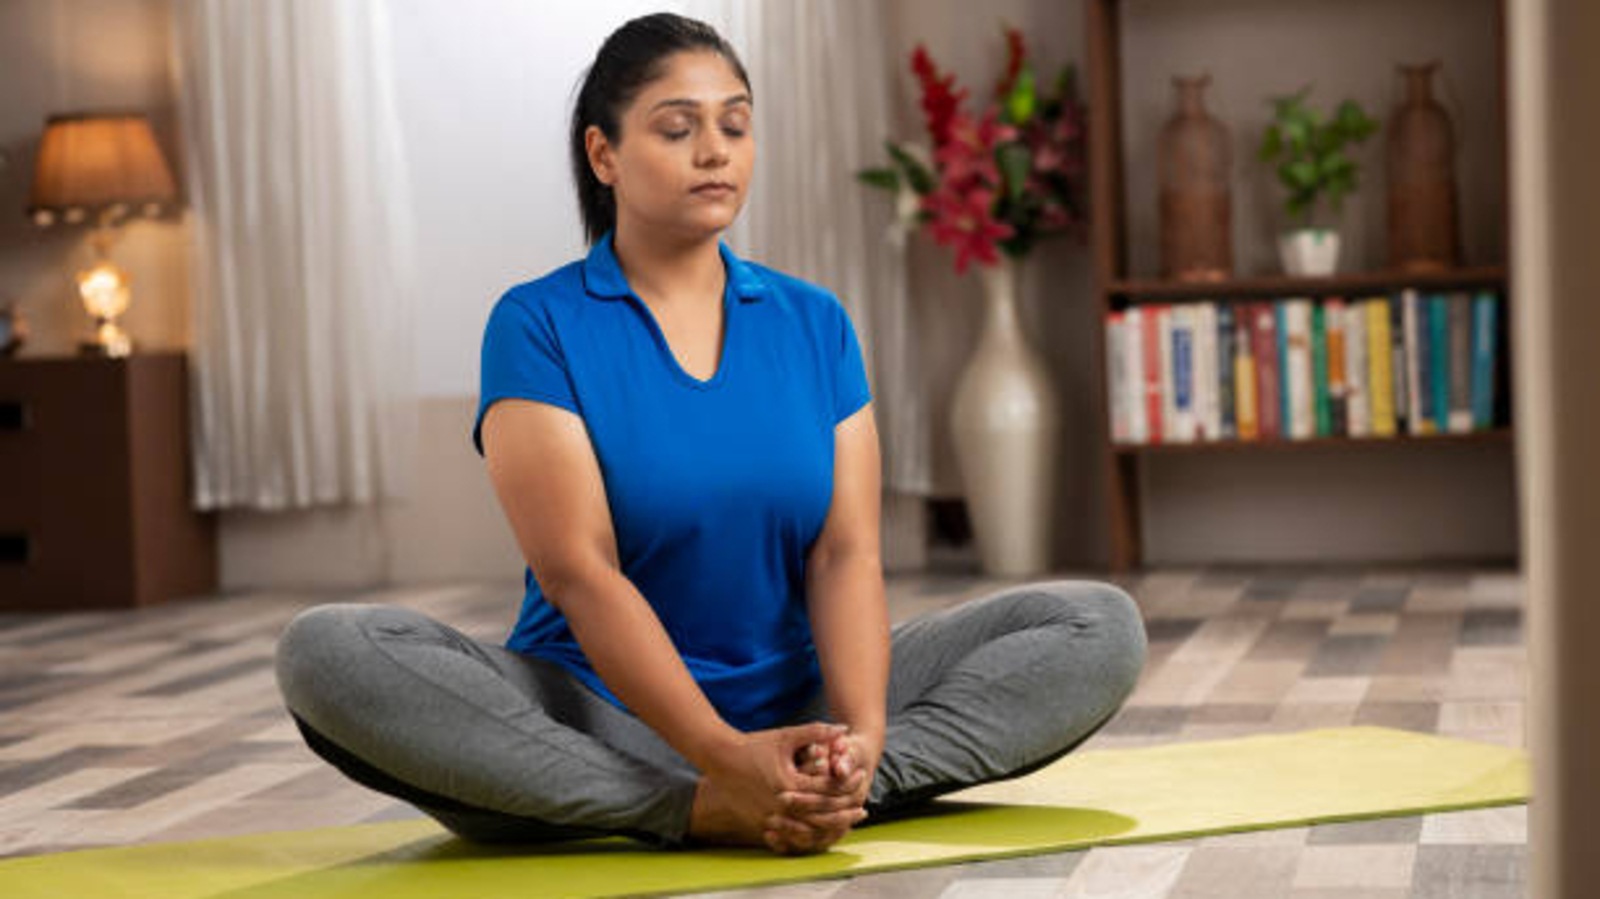 4 seated asanas to find stability and ease body, mind and spirit